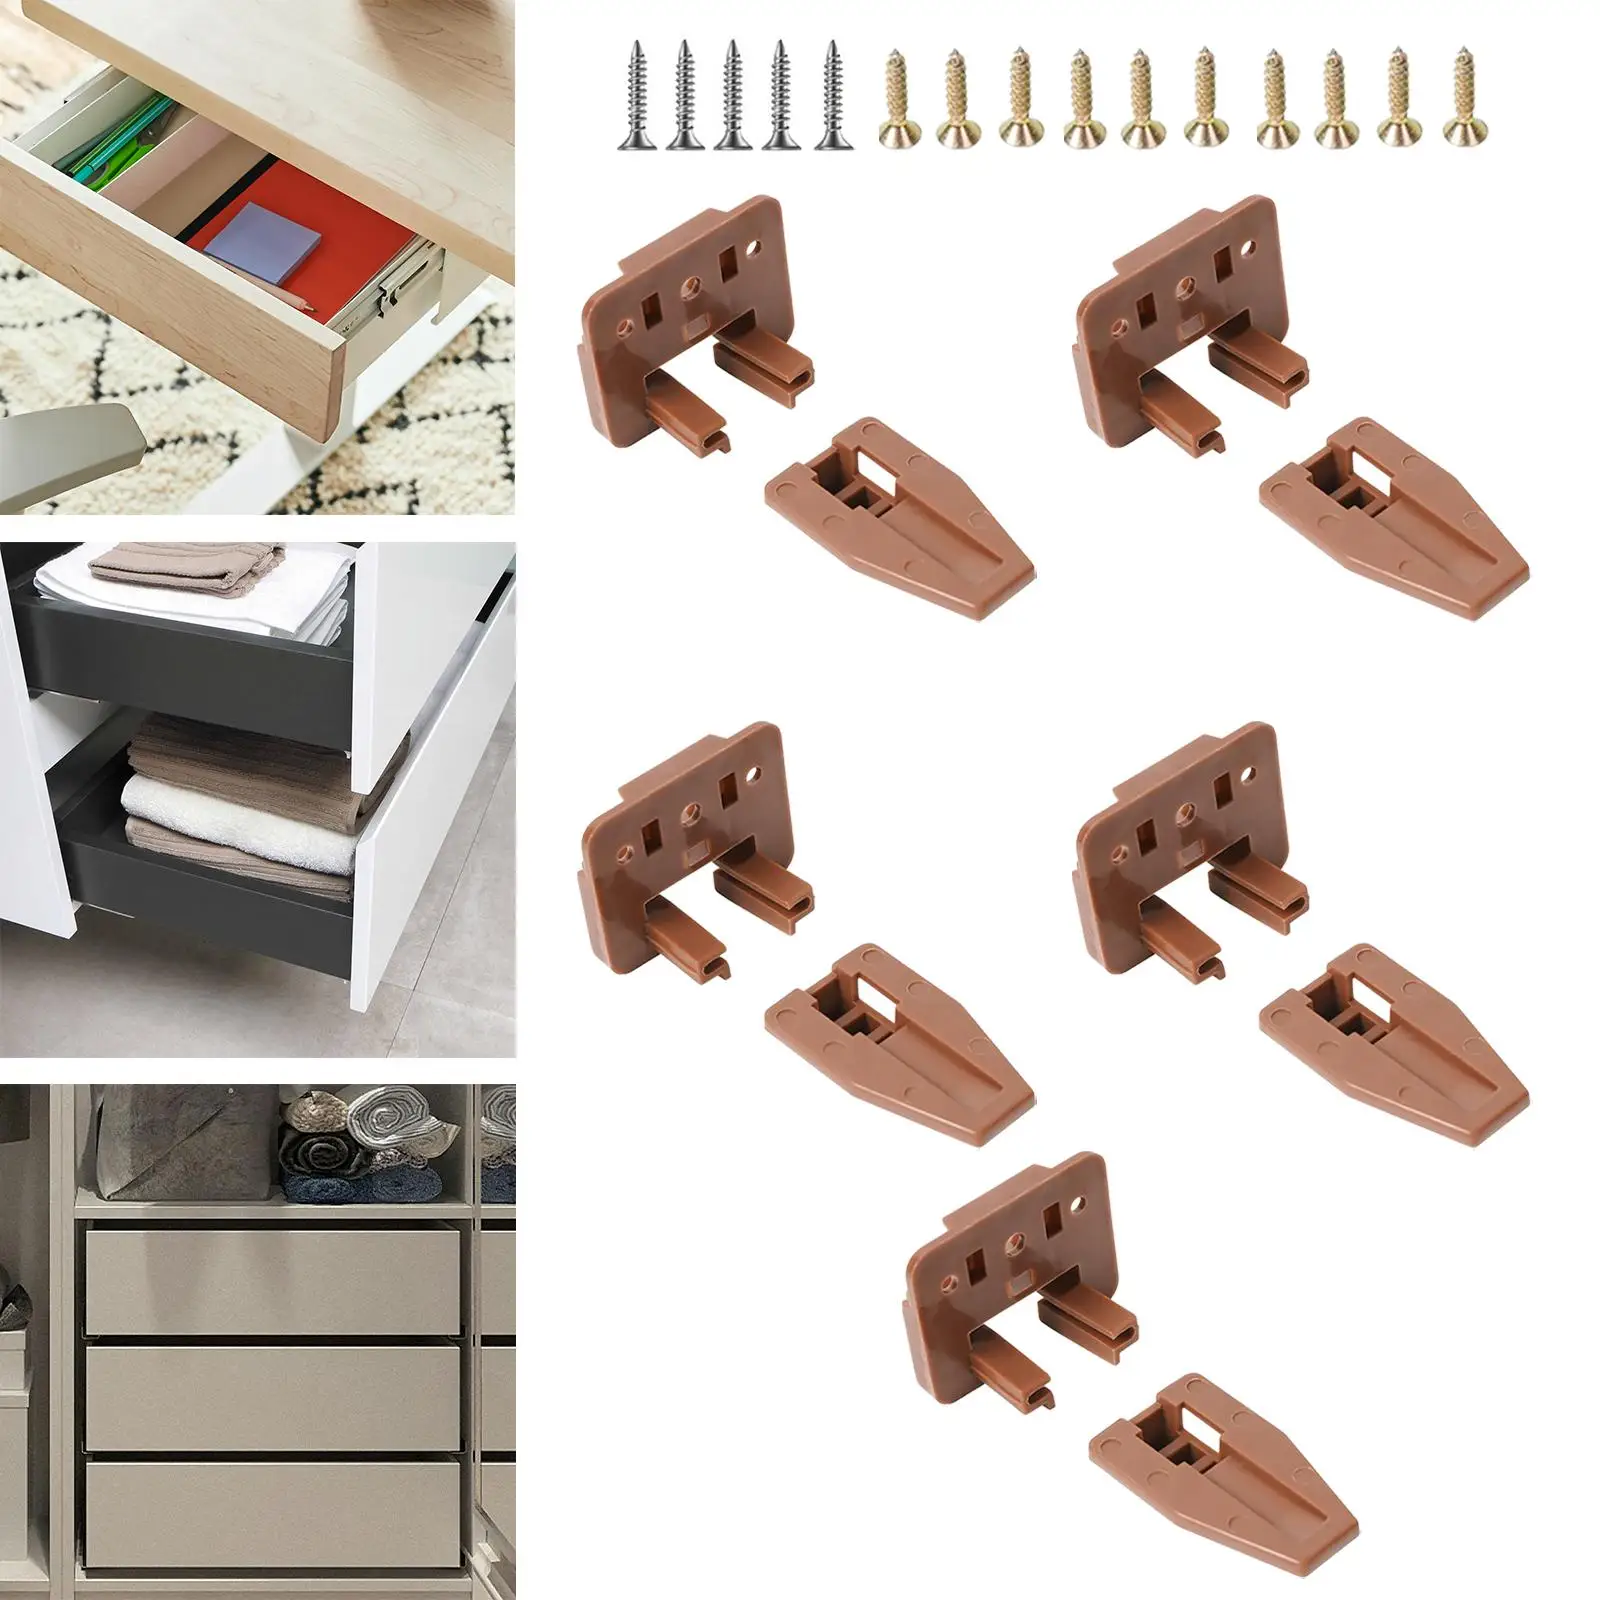 5 Pieces Drawer Slides Track Guide with Nails Mount Pp,Brown Drawer Replacement Part for NightStand Center Mount Drawer